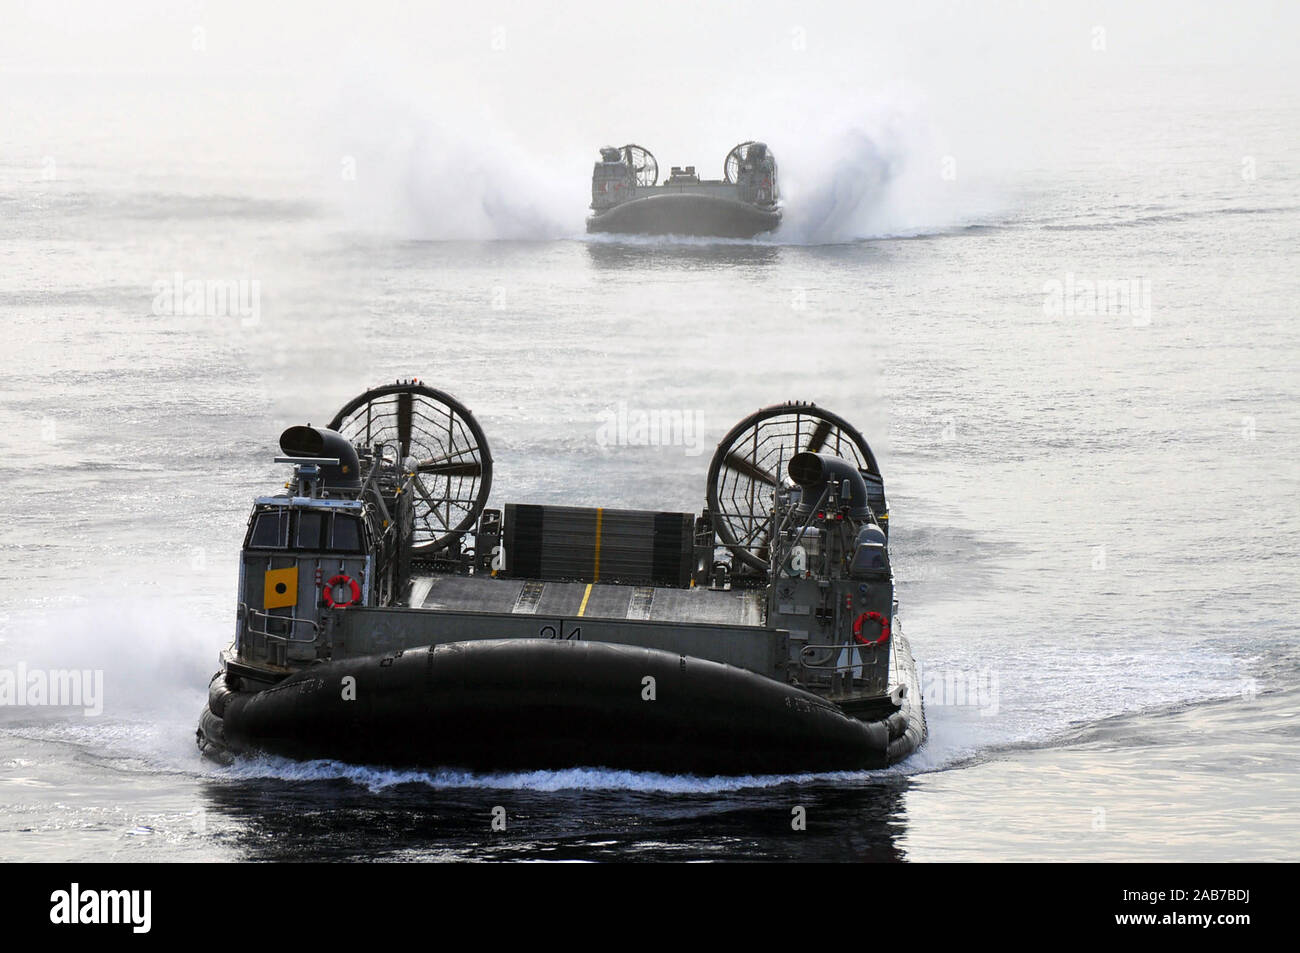 SAN DIEGO (Aug. 30, 2012) Landing Craft Air Cushion (LCAC) 24 and 73, from Assault Craft Unit (ACU) 5, approach the well deck of the amphibious assault ship USS Boxer (LHD 4).  Boxer is currently underway off the coast of Southern Calif. Stock Photo